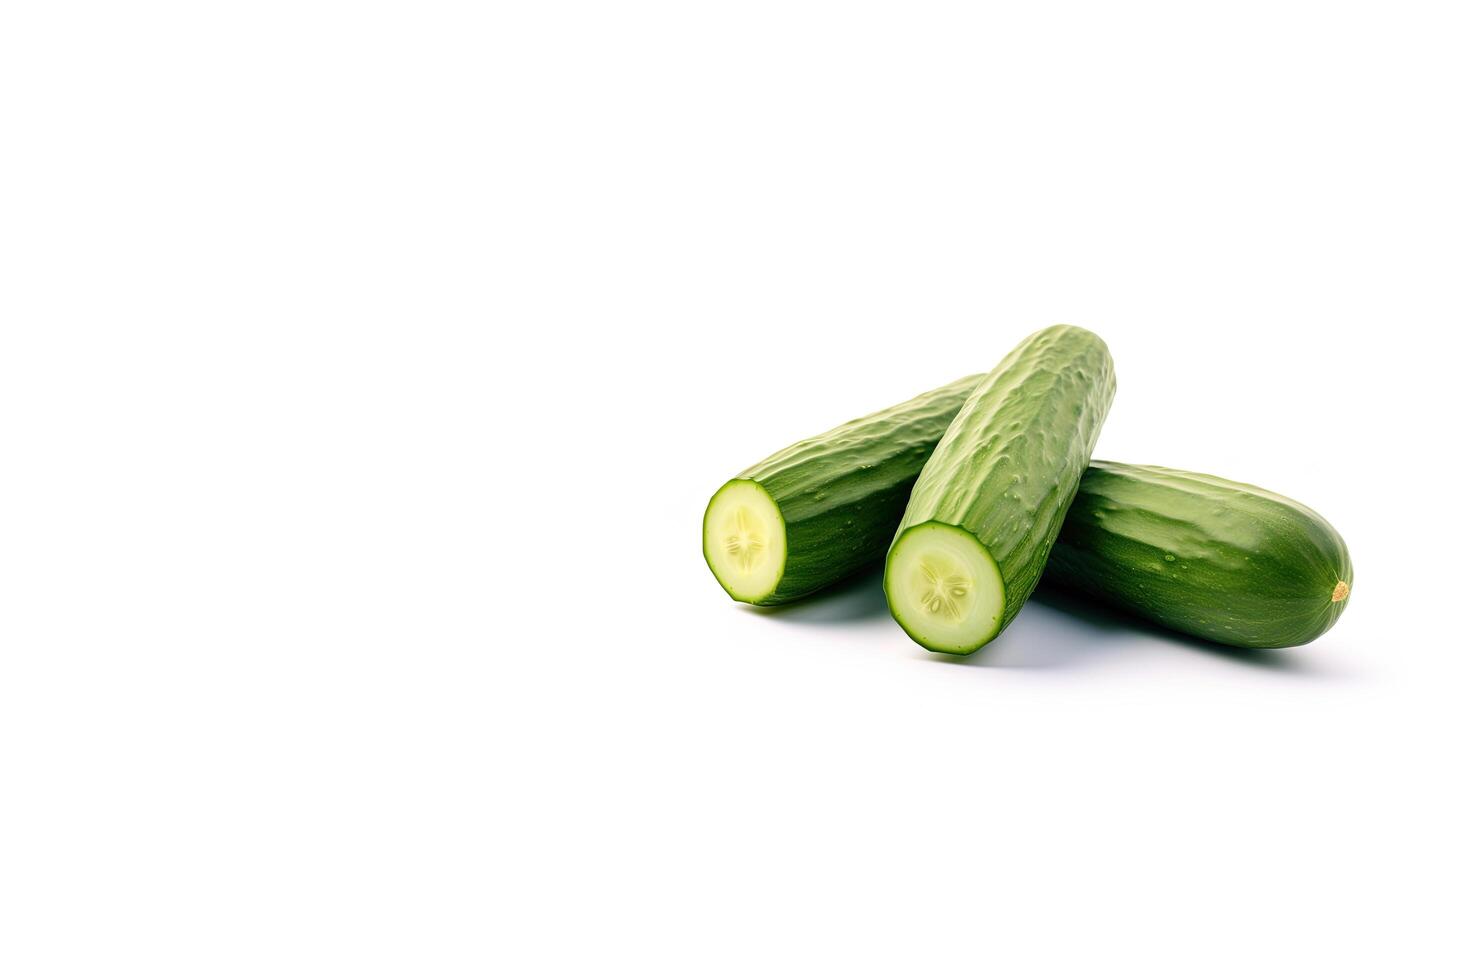 A pile of fresh whole and sliced green cucumbers isolated on white background with copy space. photo